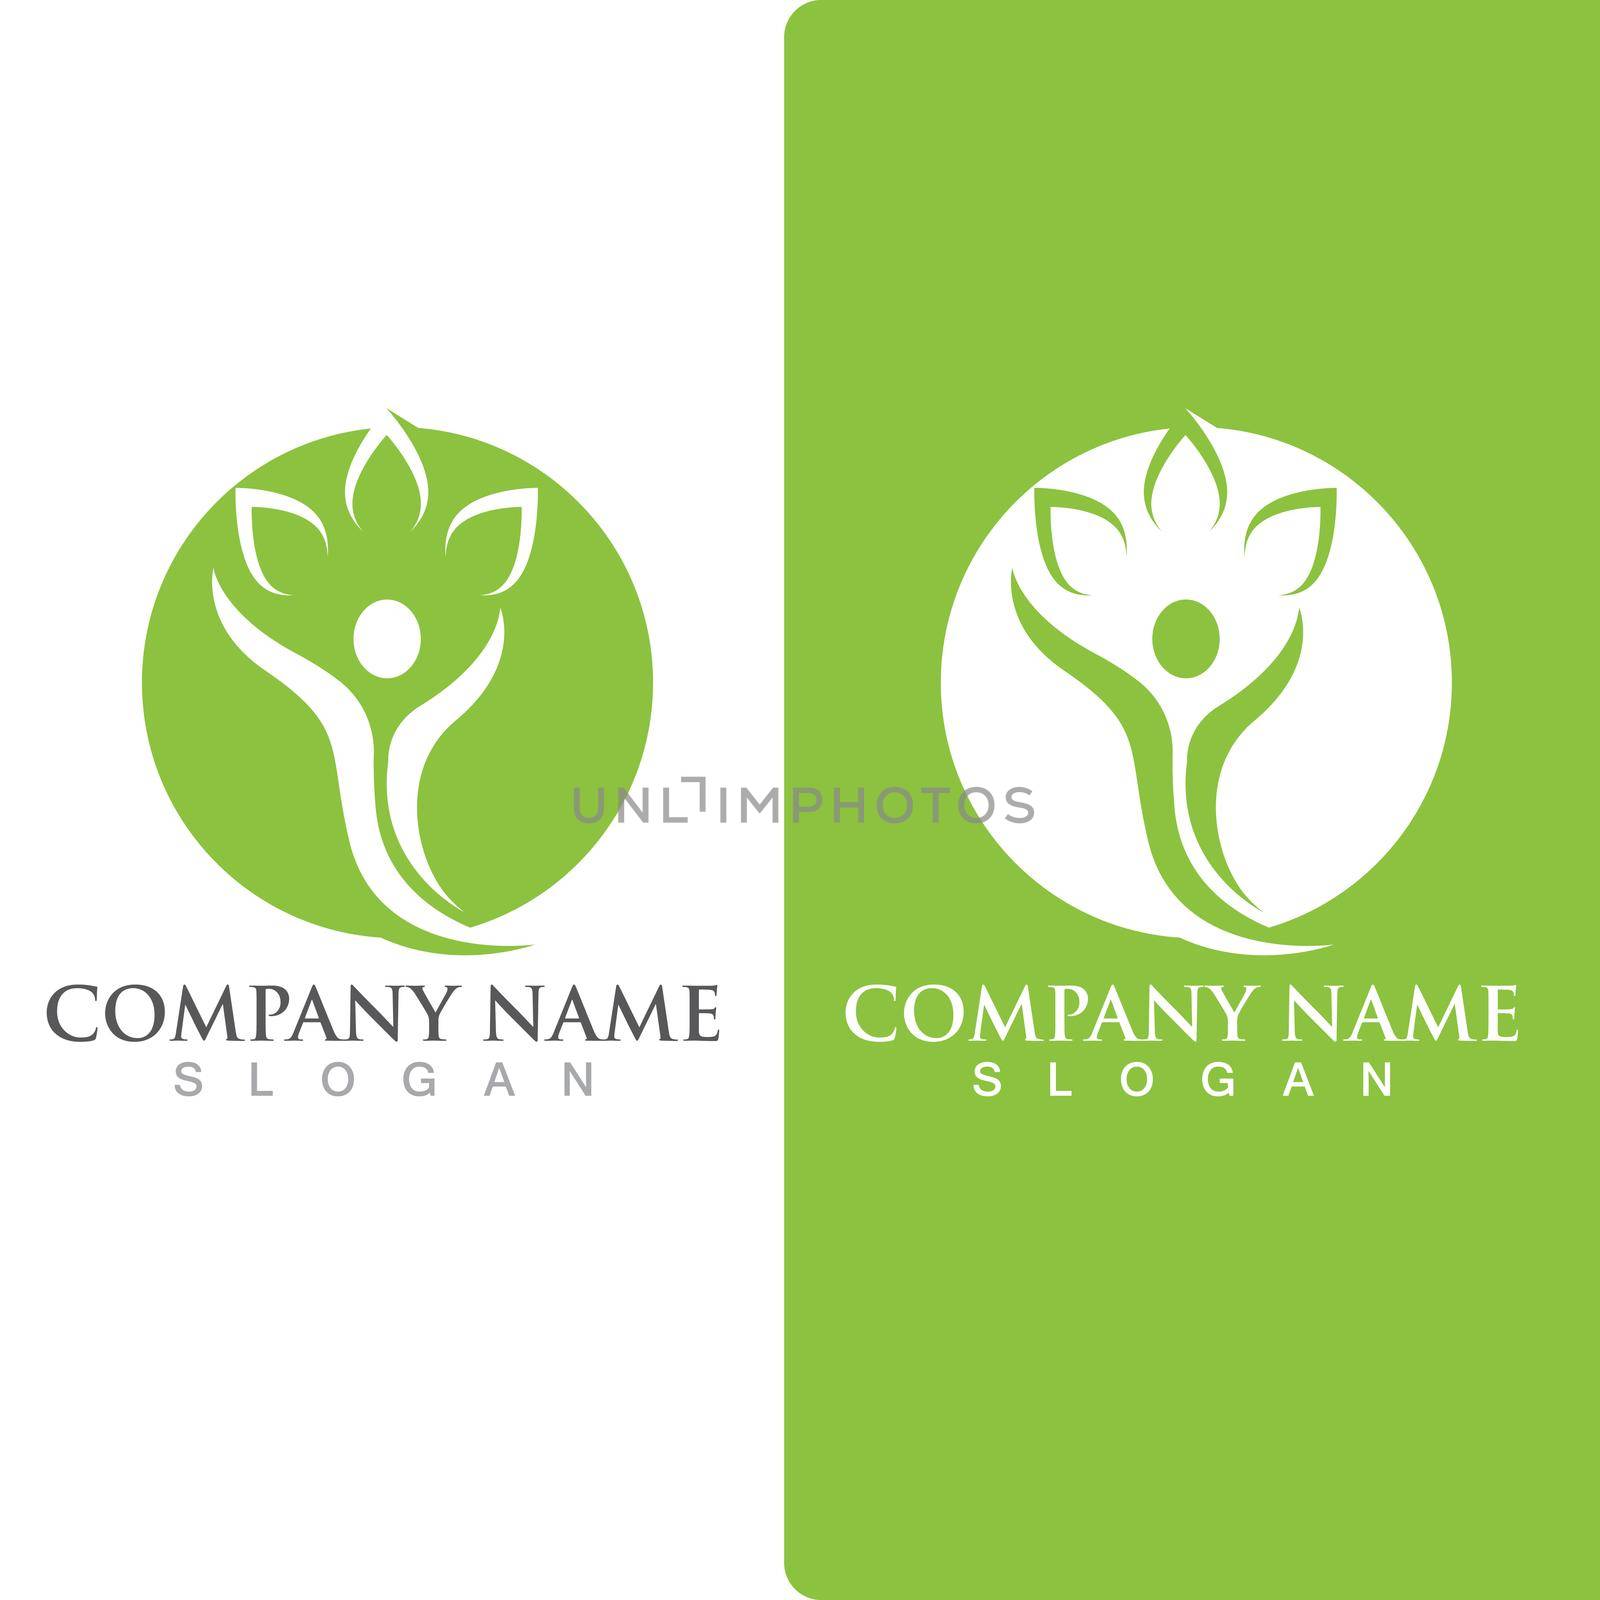 Human character logo sign by Mrsongrphc